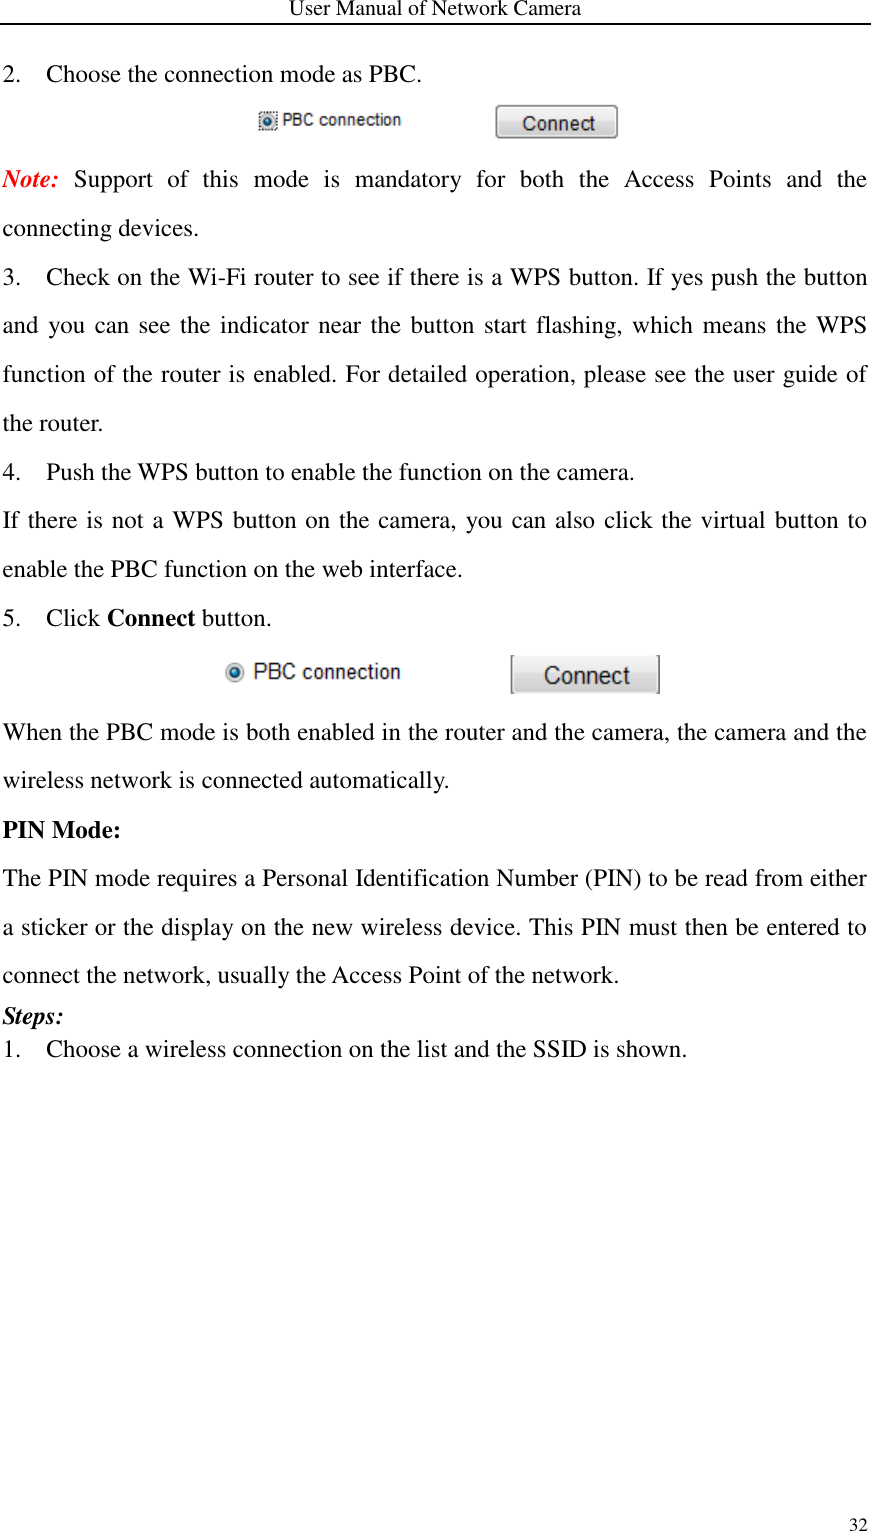 User Manual of Network Camera 32  2. Choose the connection mode as PBC.  Note:  Support  of  this  mode  is  mandatory  for  both  the  Access  Points  and  the connecting devices. 3. Check on the Wi-Fi router to see if there is a WPS button. If yes push the button and you can see the indicator near the button start flashing, which means the WPS function of the router is enabled. For detailed operation, please see the user guide of the router. 4. Push the WPS button to enable the function on the camera.   If there is not a WPS button on the camera, you can also click the virtual button to enable the PBC function on the web interface.   5. Click Connect button.  When the PBC mode is both enabled in the router and the camera, the camera and the wireless network is connected automatically. PIN Mode: The PIN mode requires a Personal Identification Number (PIN) to be read from either a sticker or the display on the new wireless device. This PIN must then be entered to connect the network, usually the Access Point of the network.   Steps: 1. Choose a wireless connection on the list and the SSID is shown.   